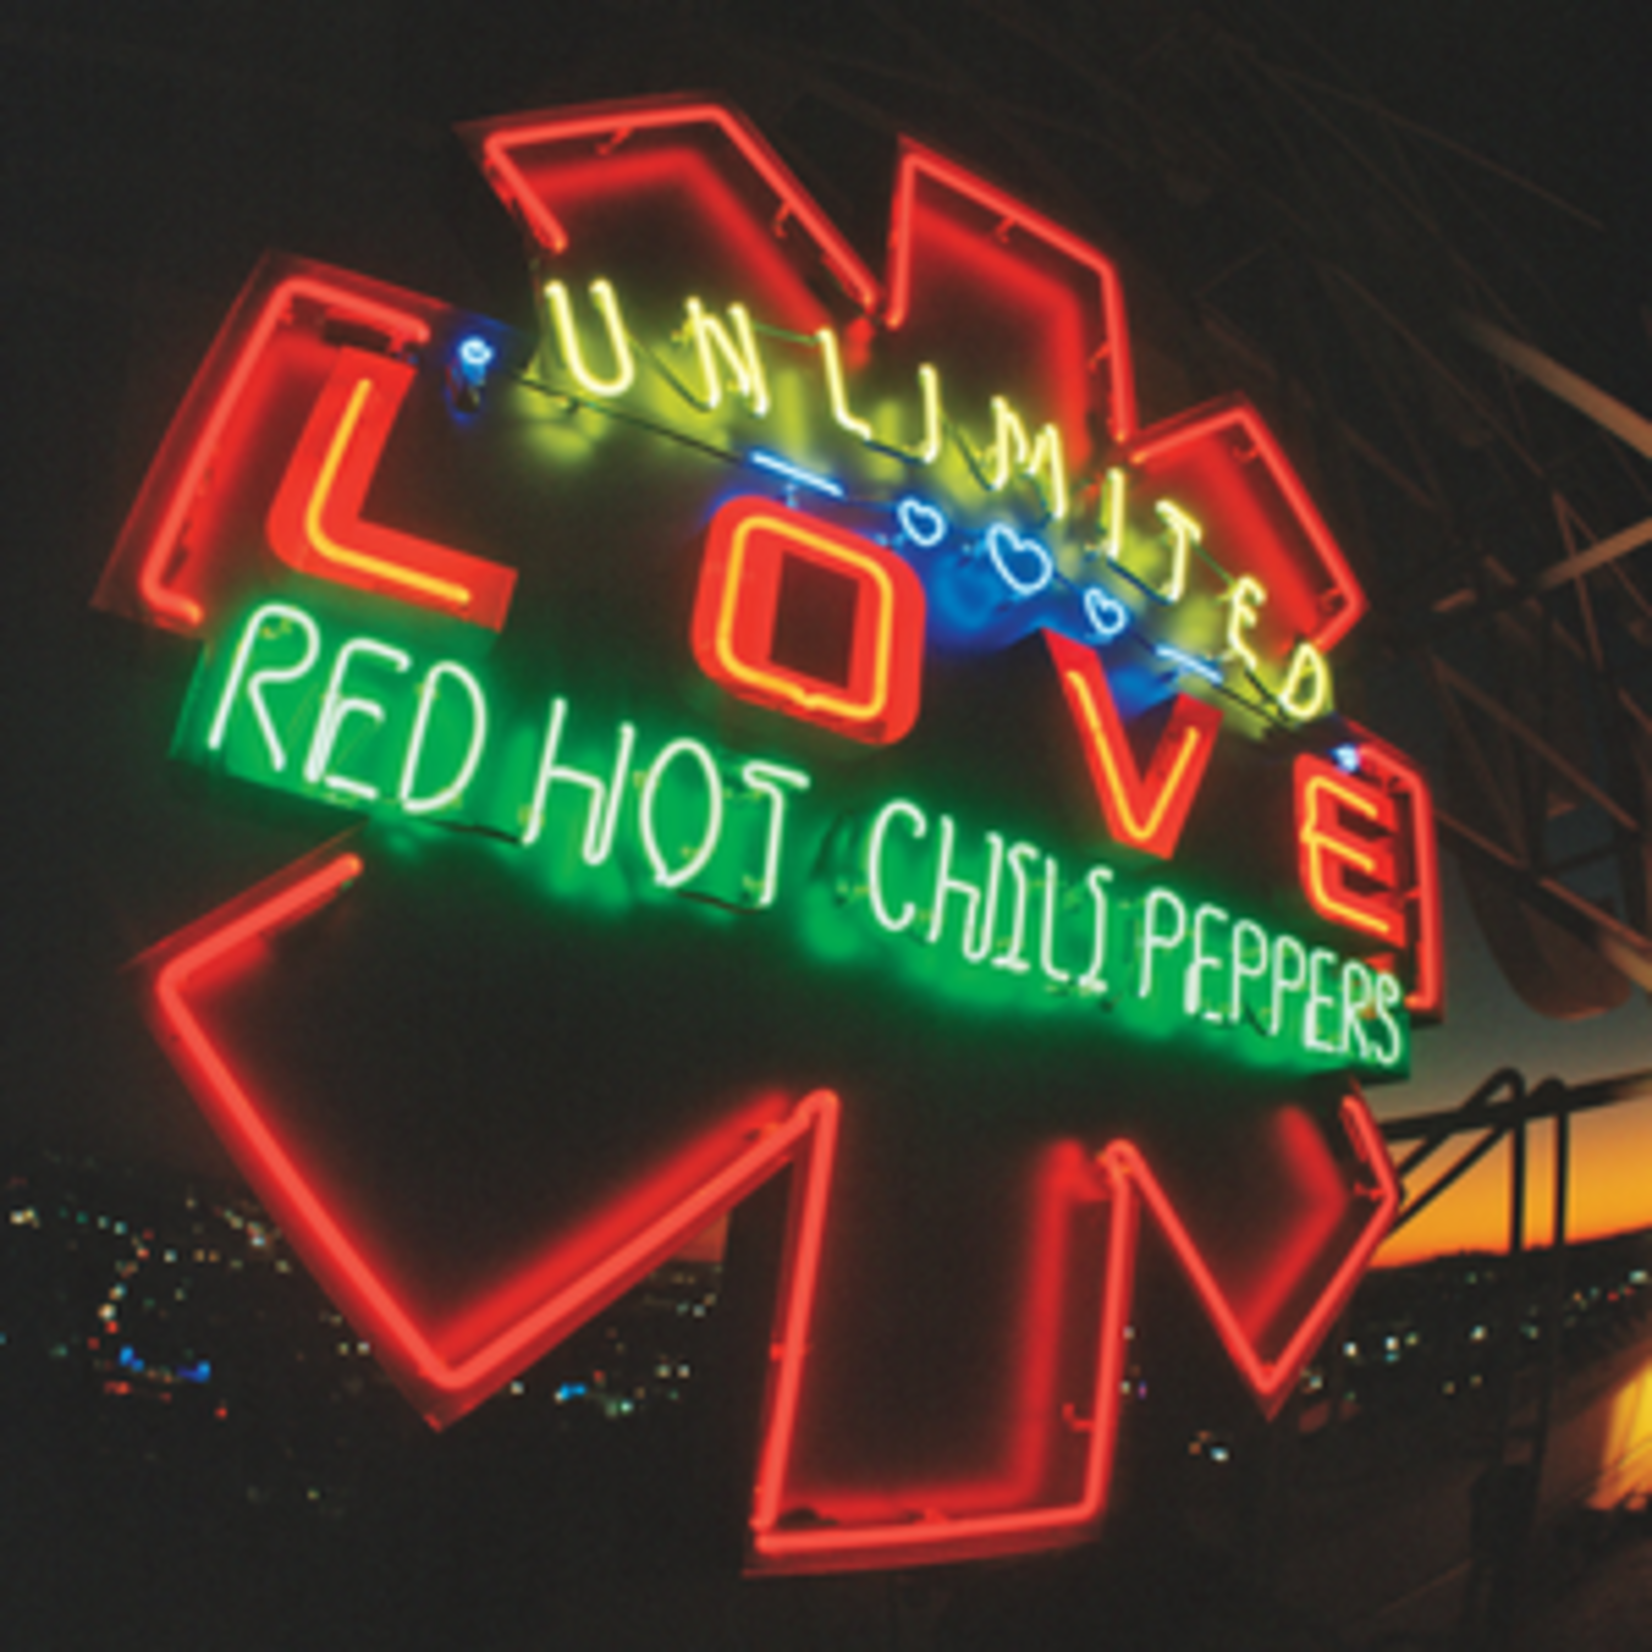 [New] Red Hot Chili Peppers - Unlimited Love (2LP, gatefold & poster, deluxe edition)